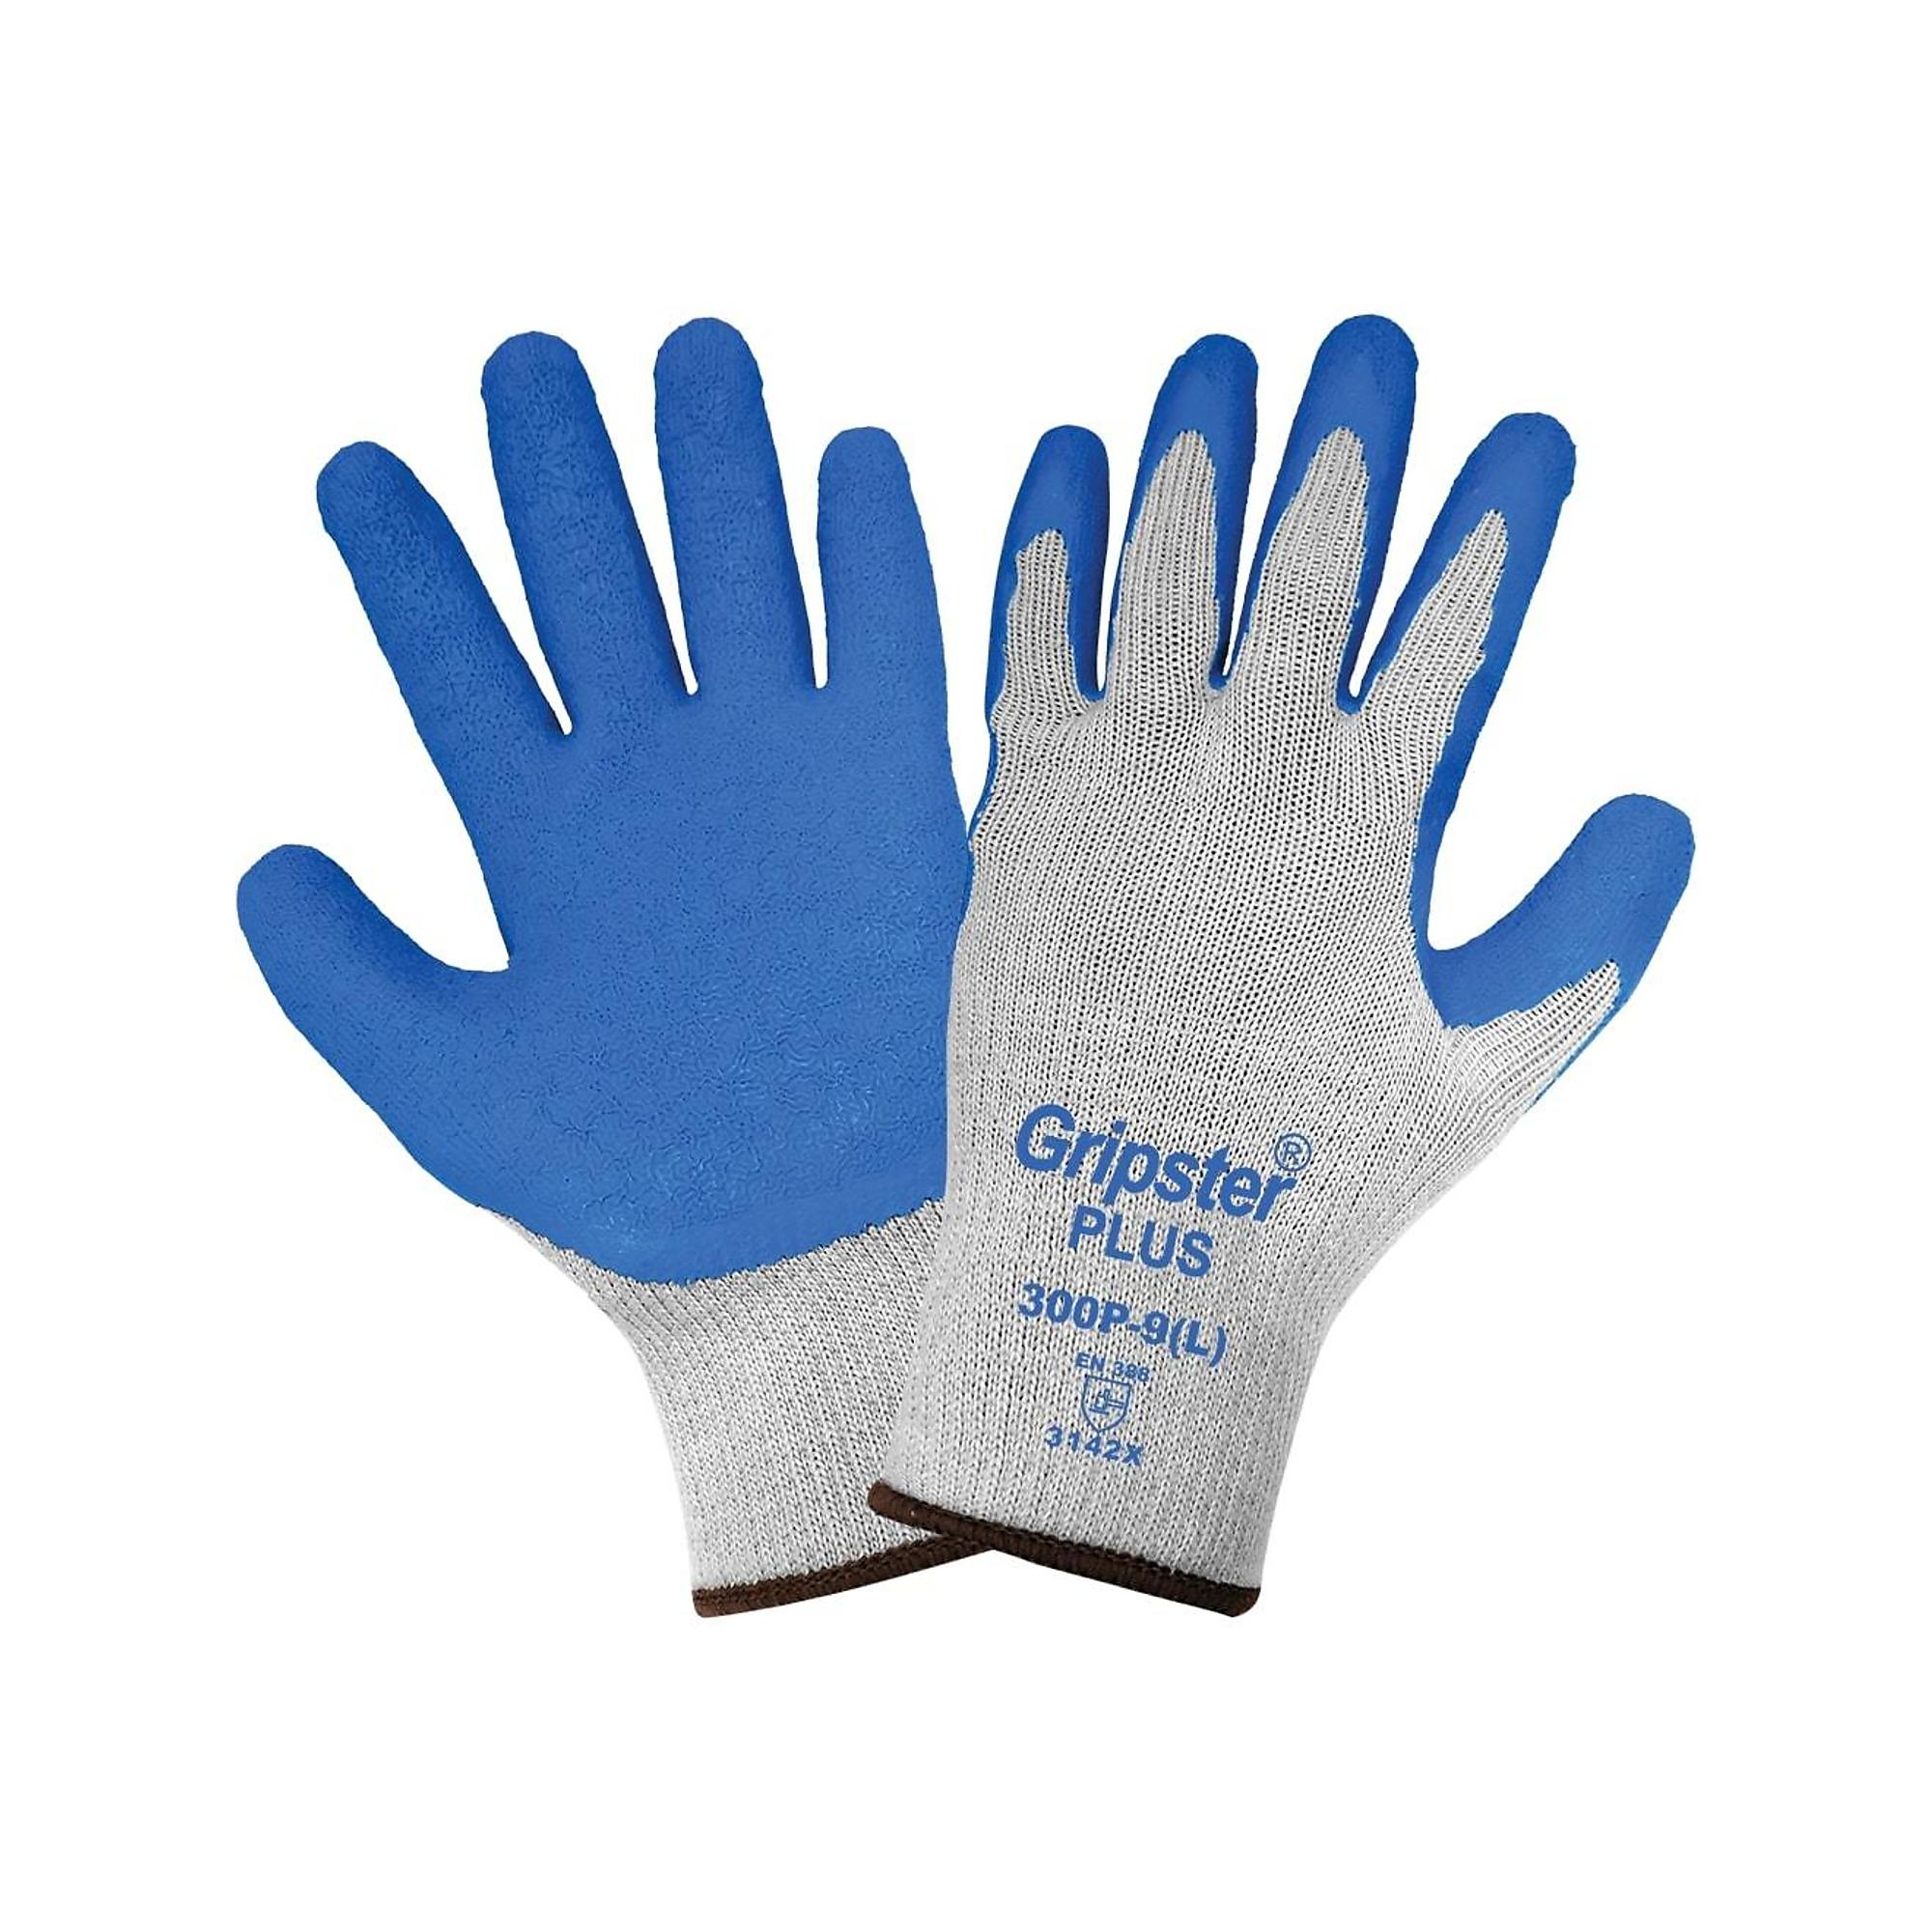 Global Glove Gripster , Gray, Blue Rubber Palm, Cut Resistant A2 Gloves - 12 Pairs, Size L, Color Gray/Blue, Included (qty.) 12 Model 300P-9(L)